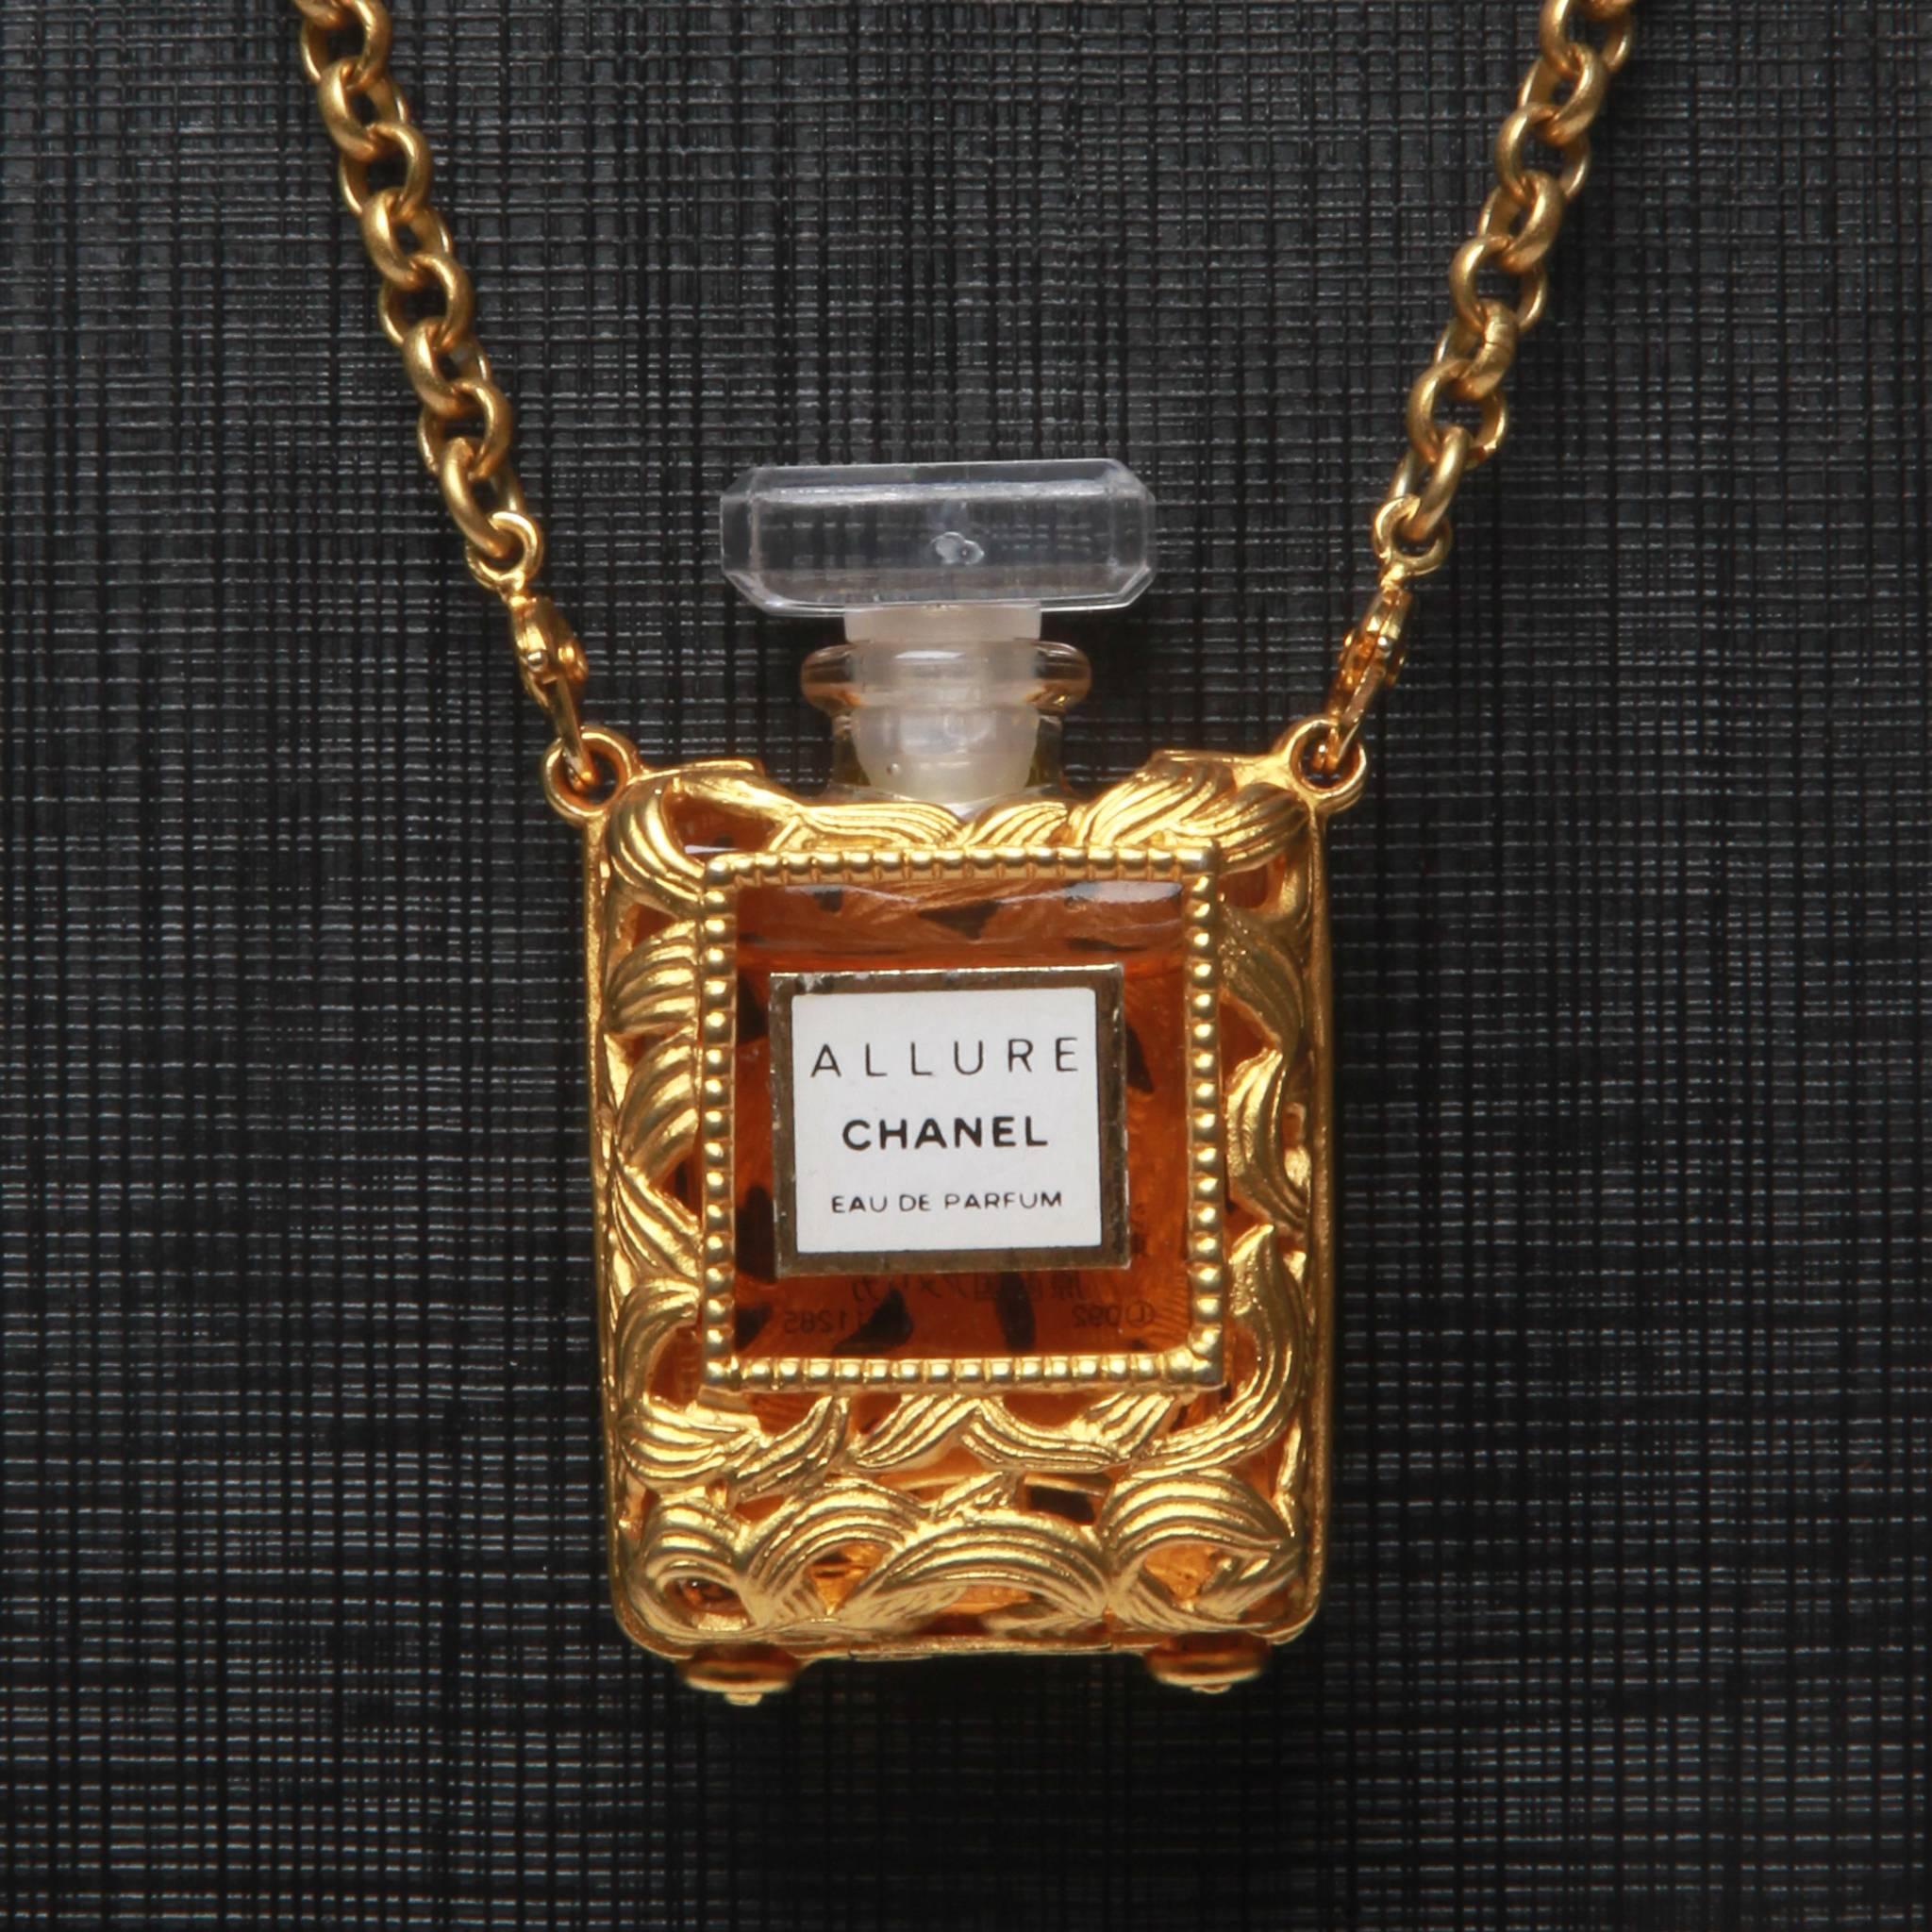 Coveted Chanel gold necklace featuring a miniature real Chanel 'Allure' perfume bottle in an ornate gold-tone holder as pendant. 31